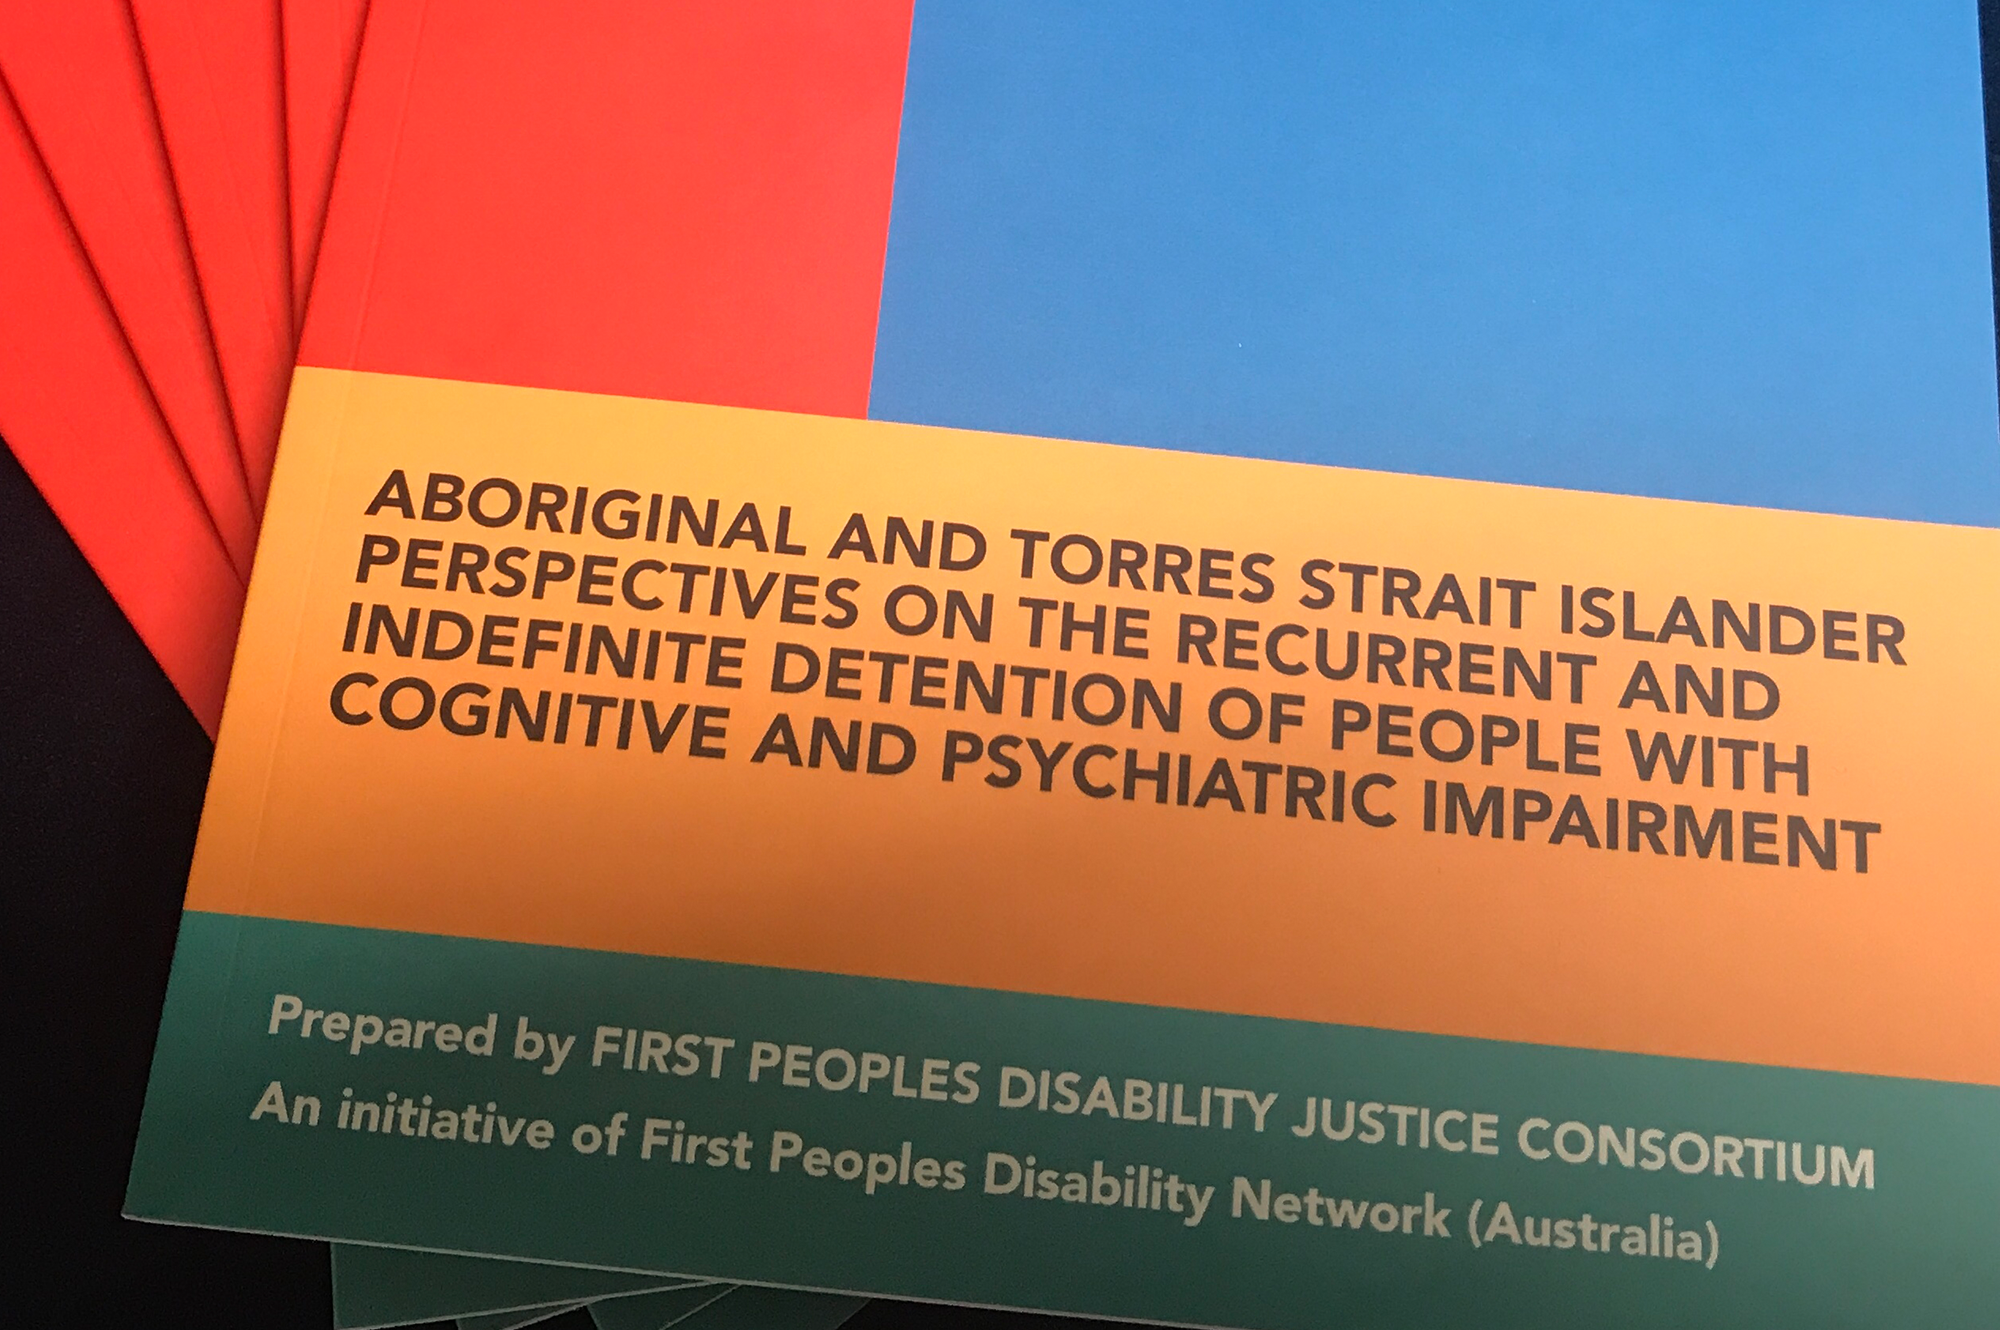 Senate Inquiry Submission: Aboriginal and Torres Strait Islander Perspectives on the Recurrent and Indefinite Detention of People with  Cognitive and Psychiatric Impairment